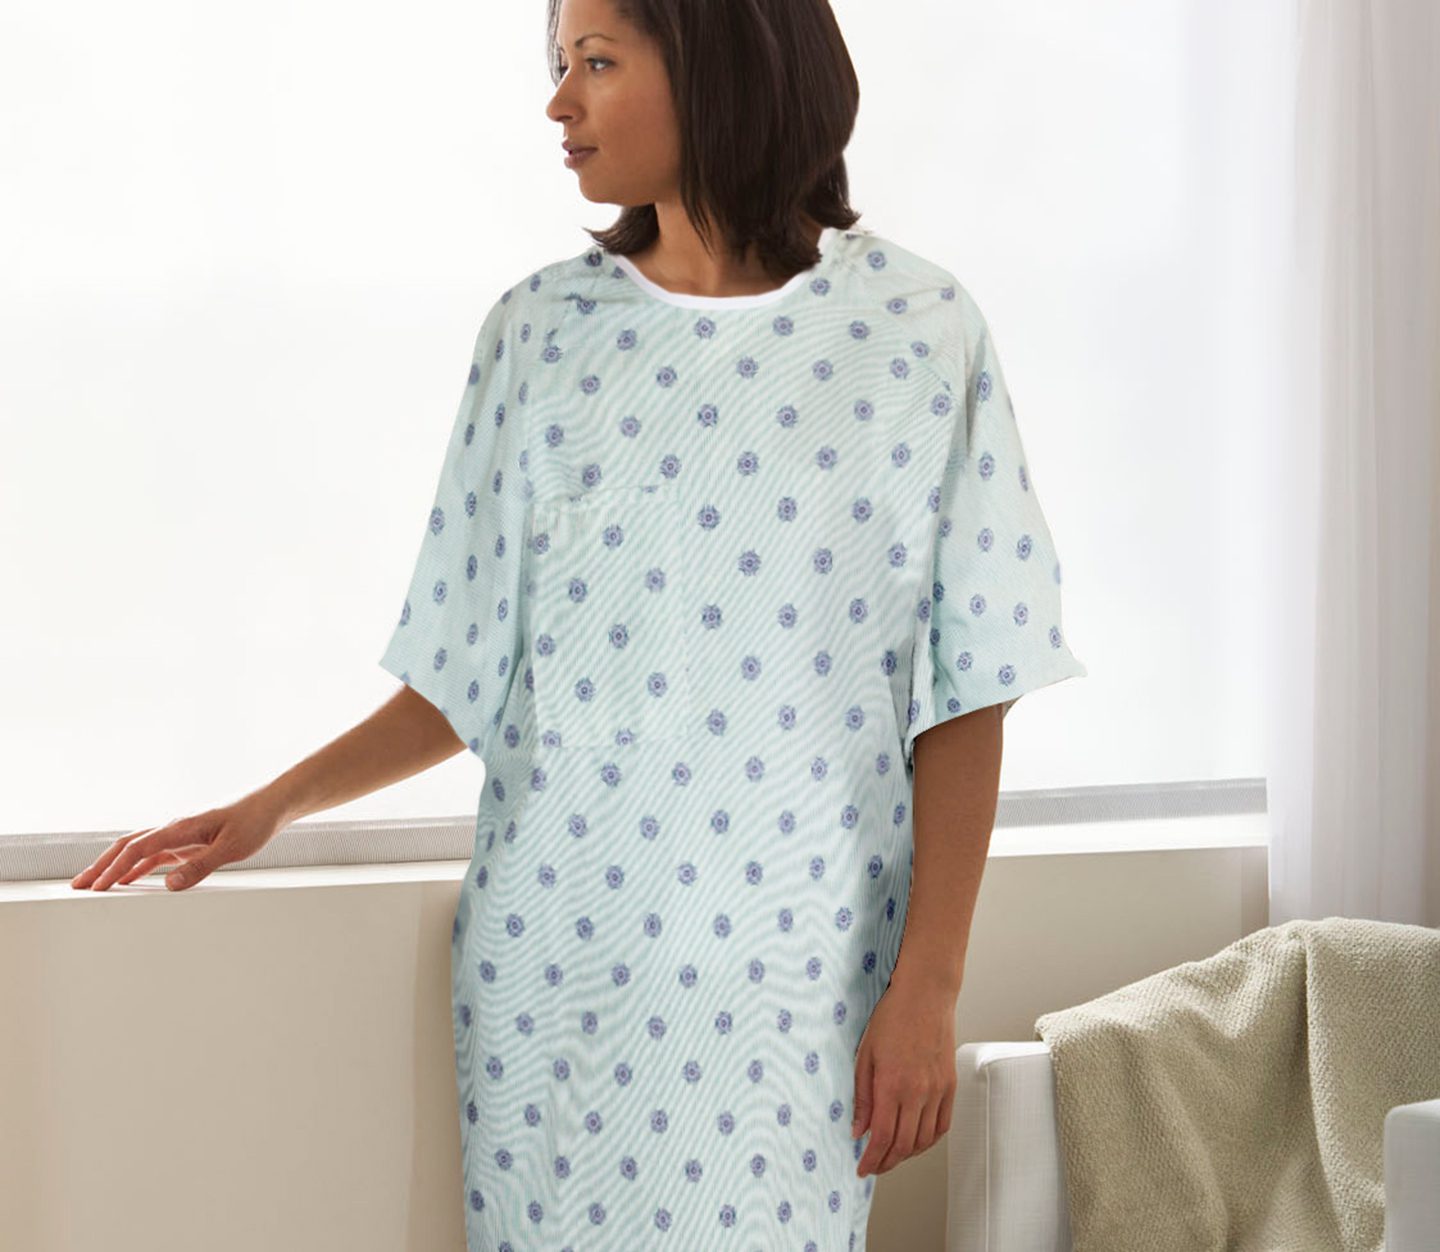 BIOBLOCKED | STANDARD SURGICAL GOWN